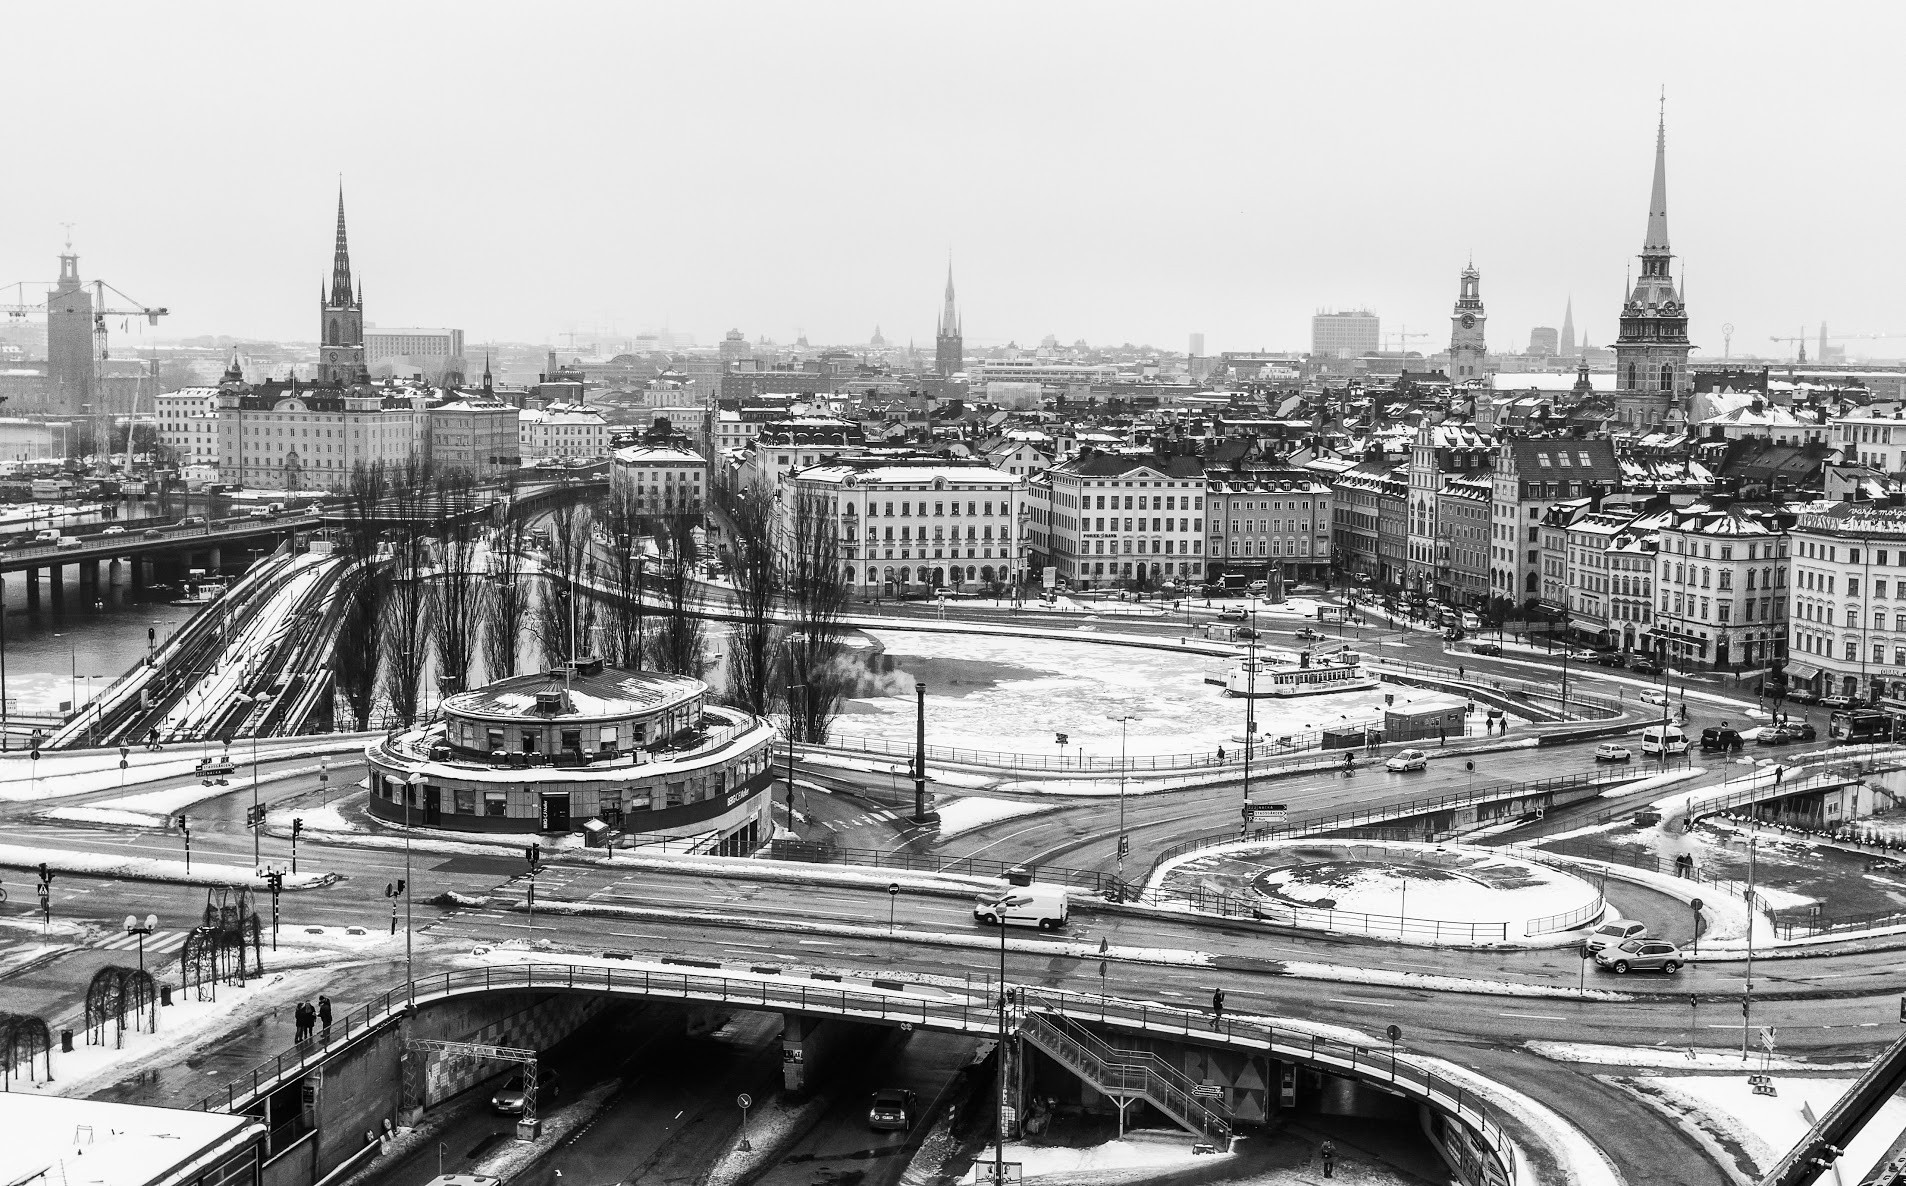 photography, Urban, Building, Monochrome, Cityscape, Church, Winter, Ice, Stockholm, Water Wallpaper